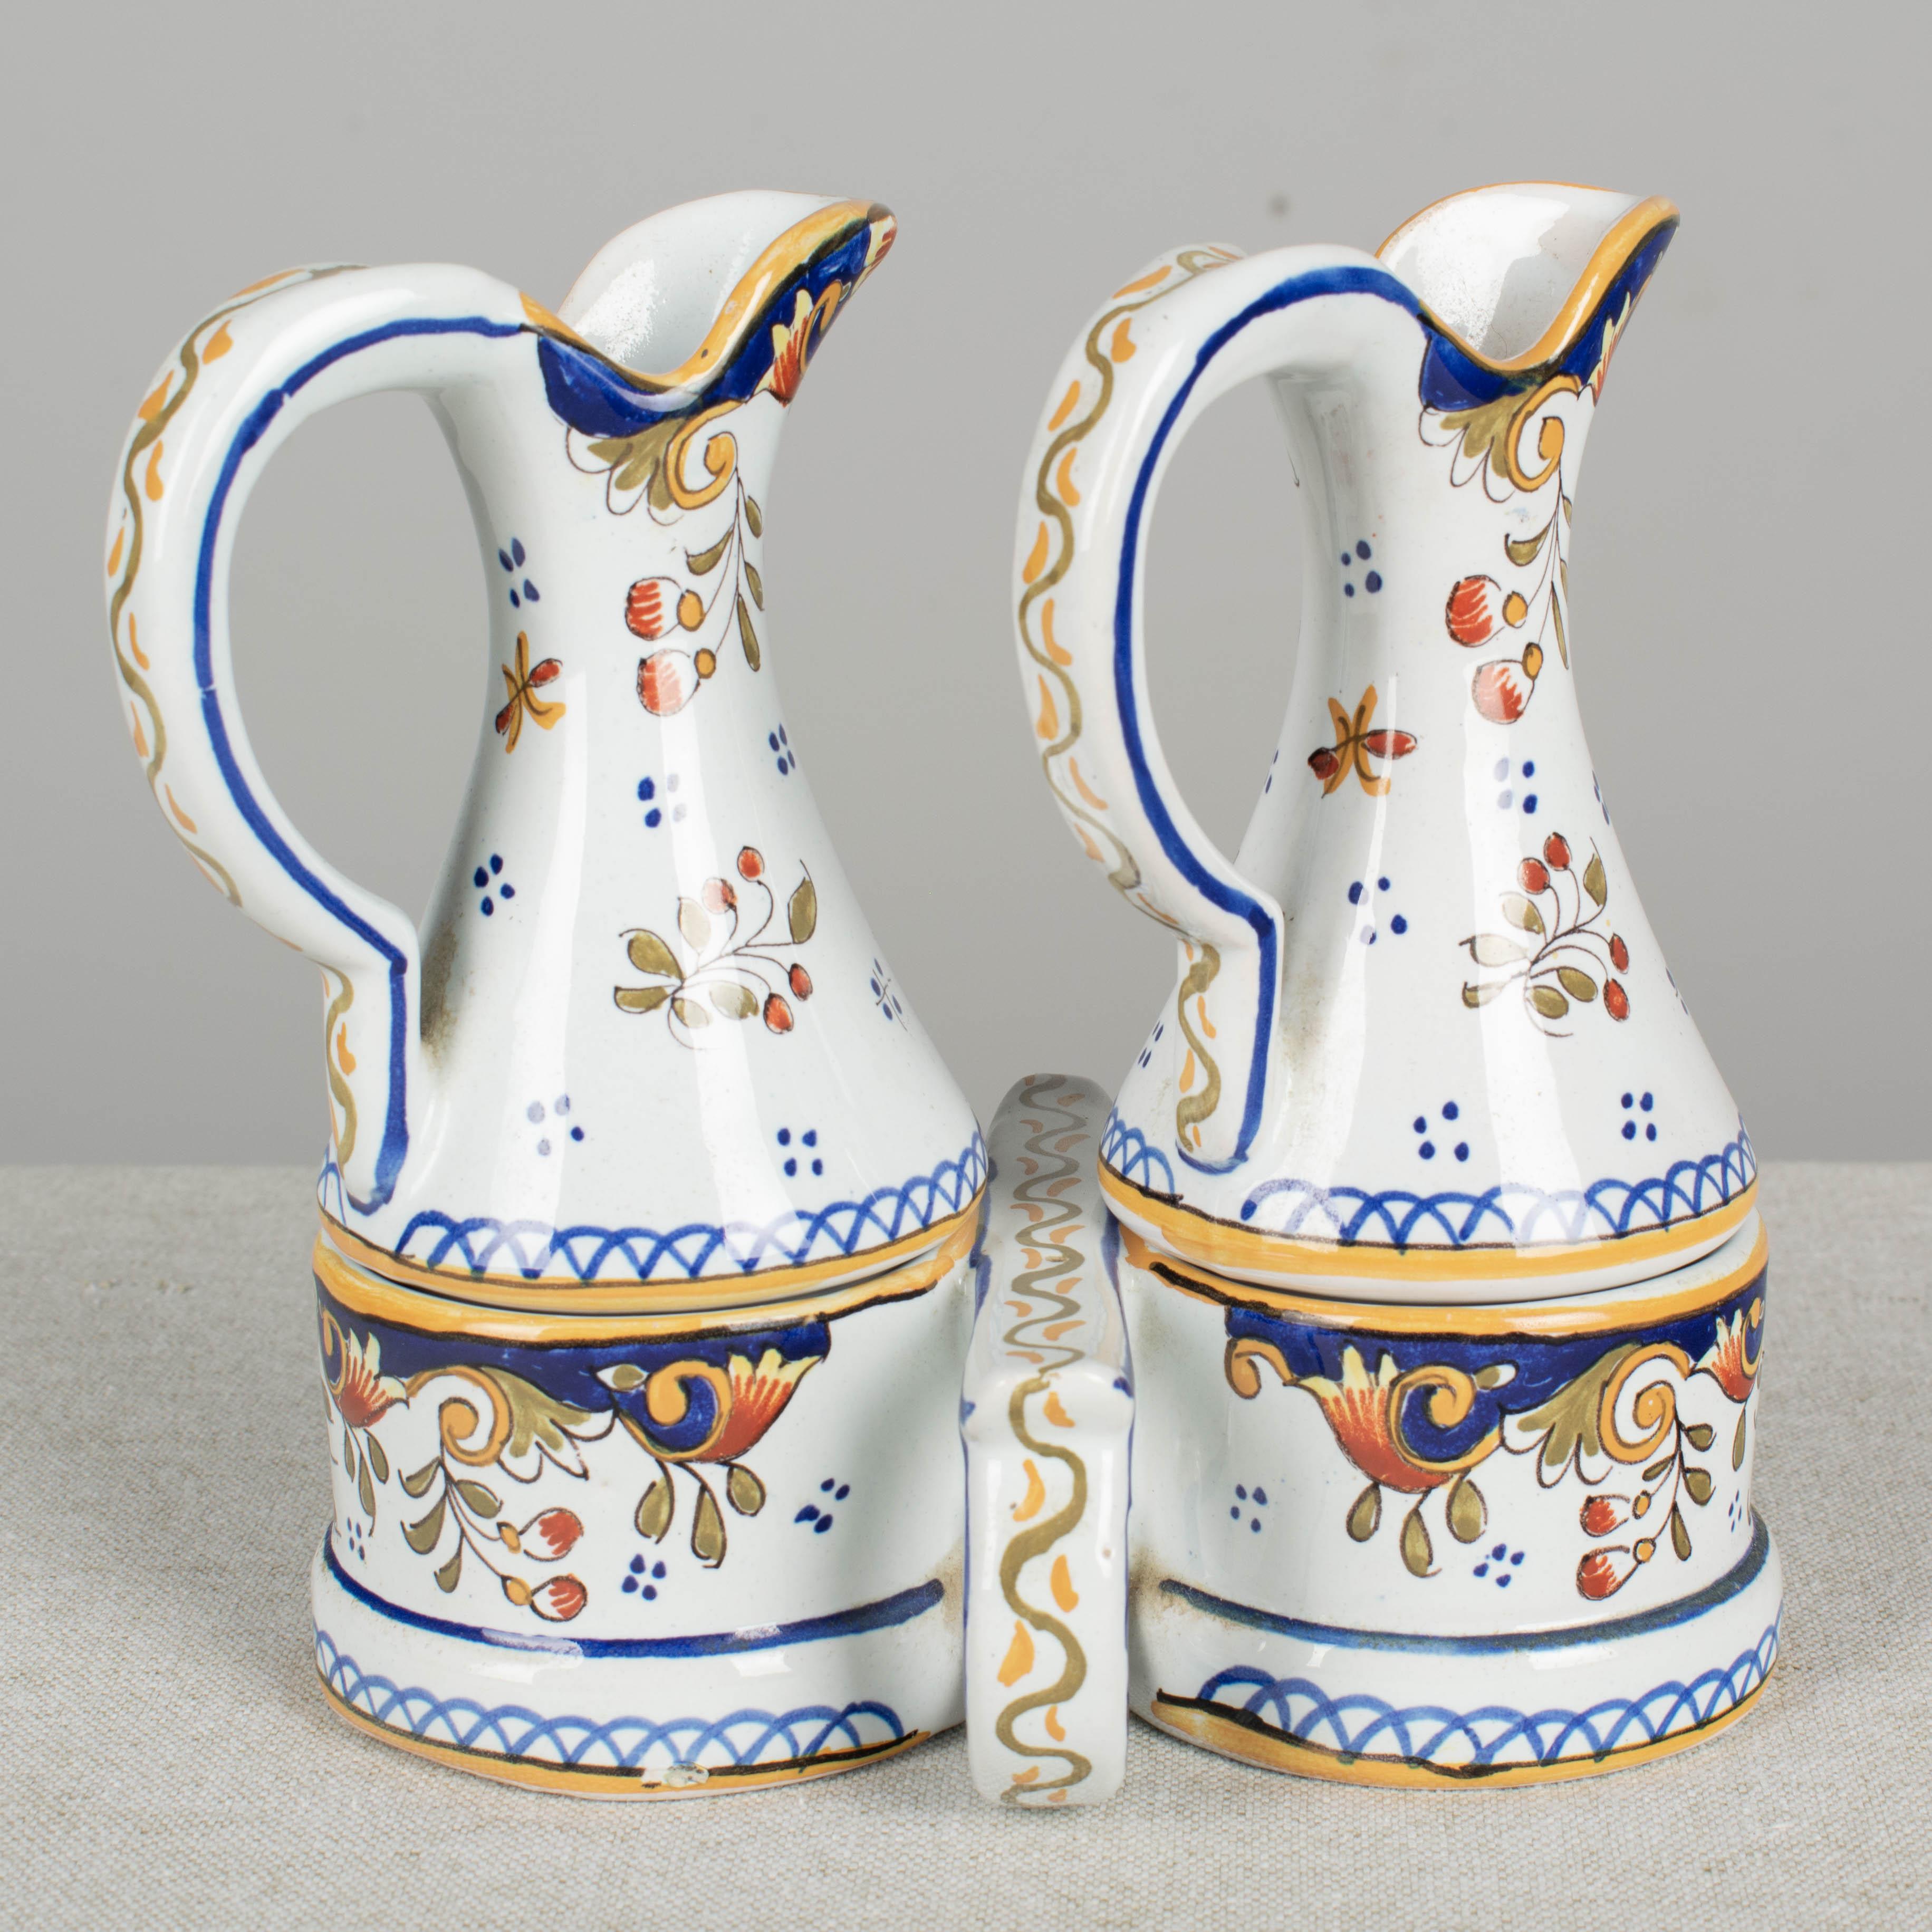 A French Desvres faience cruet set, with hand painted floral decoration in the traditional colors of blue yellow, green and orange. The base holds a pair of handled pitchers, for oil and vinegar, each decorated with the crest of Normandy, a red